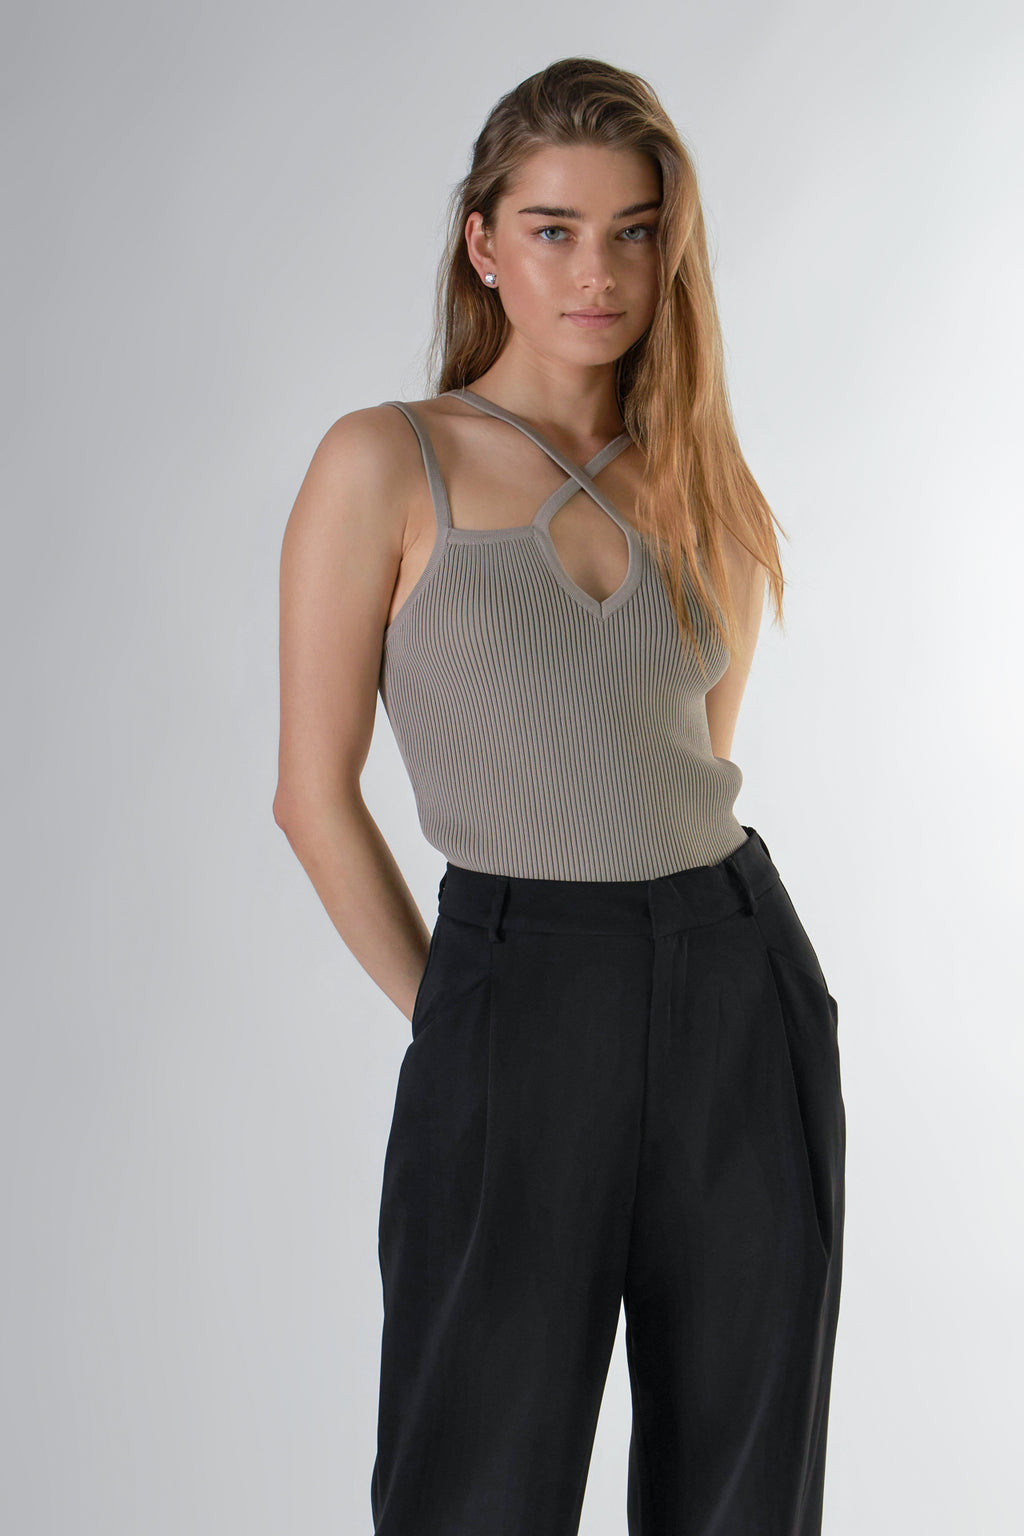 Strap Detail Fitted Knit Top